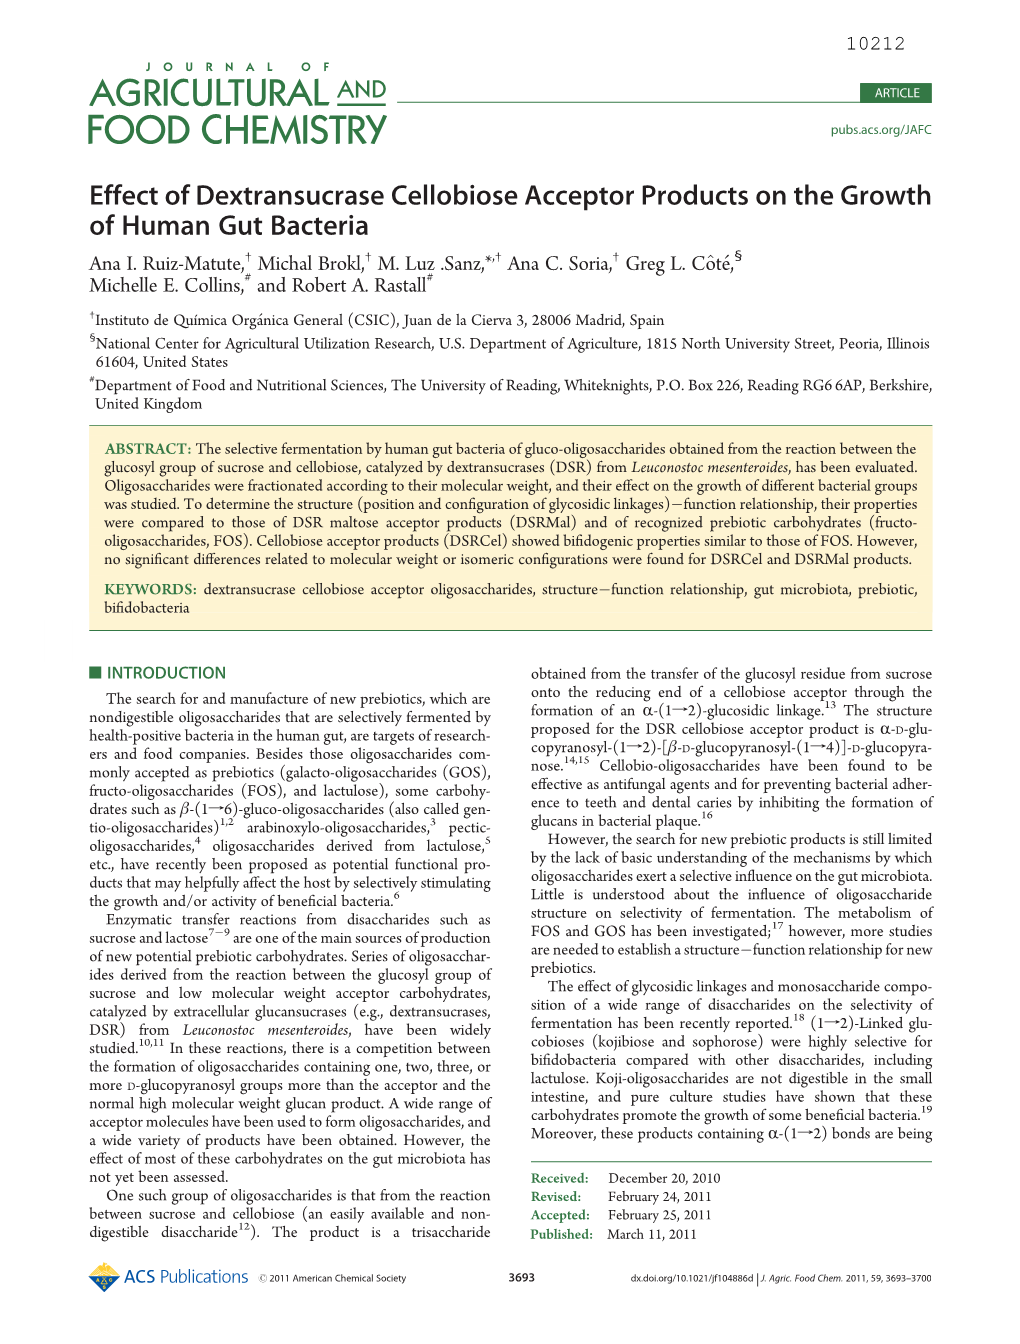 Effect of Dextransucrase Cellobiose Acceptor Products on the Growth of Human Gut Bacteria † † † † Ana I